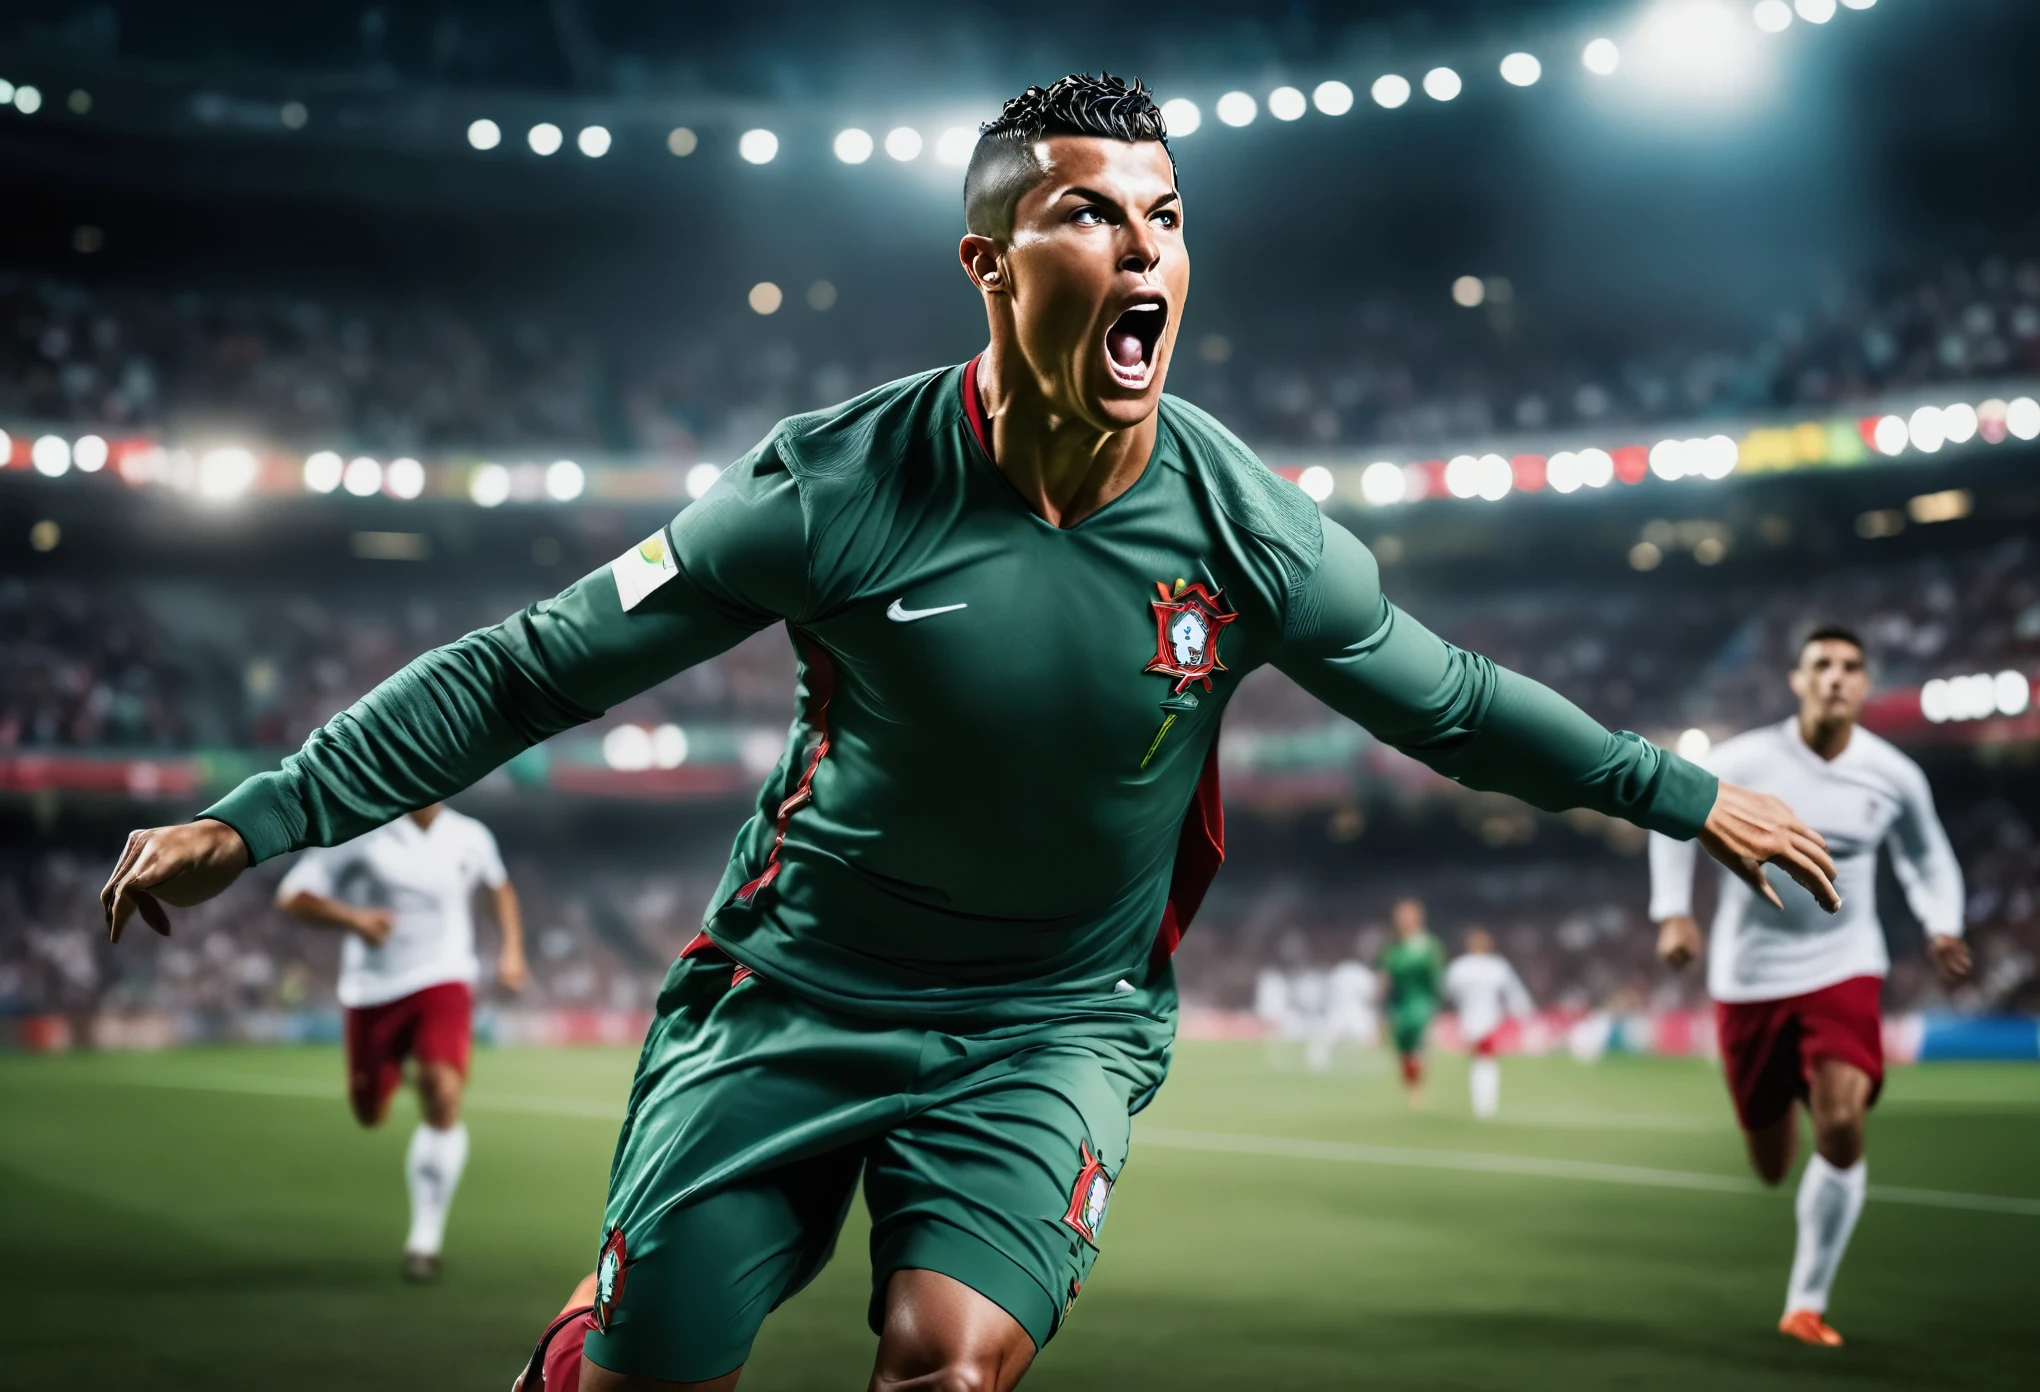 Cinematic portrait photo of Ronaldo scoring for Portugal, European football, depth of field, bokeh, sport photography, action-packed moment, dynamic, intense competition, thrilling movement, showcasing skill, conveying energy, adrenaline-fueled visuals, immersive experience, storytelling through action, dramatic composition, showcasing passion, capturing decisive moments, vibrant colours, dynamic composition, powerful imagery, engaging perspective, realistic